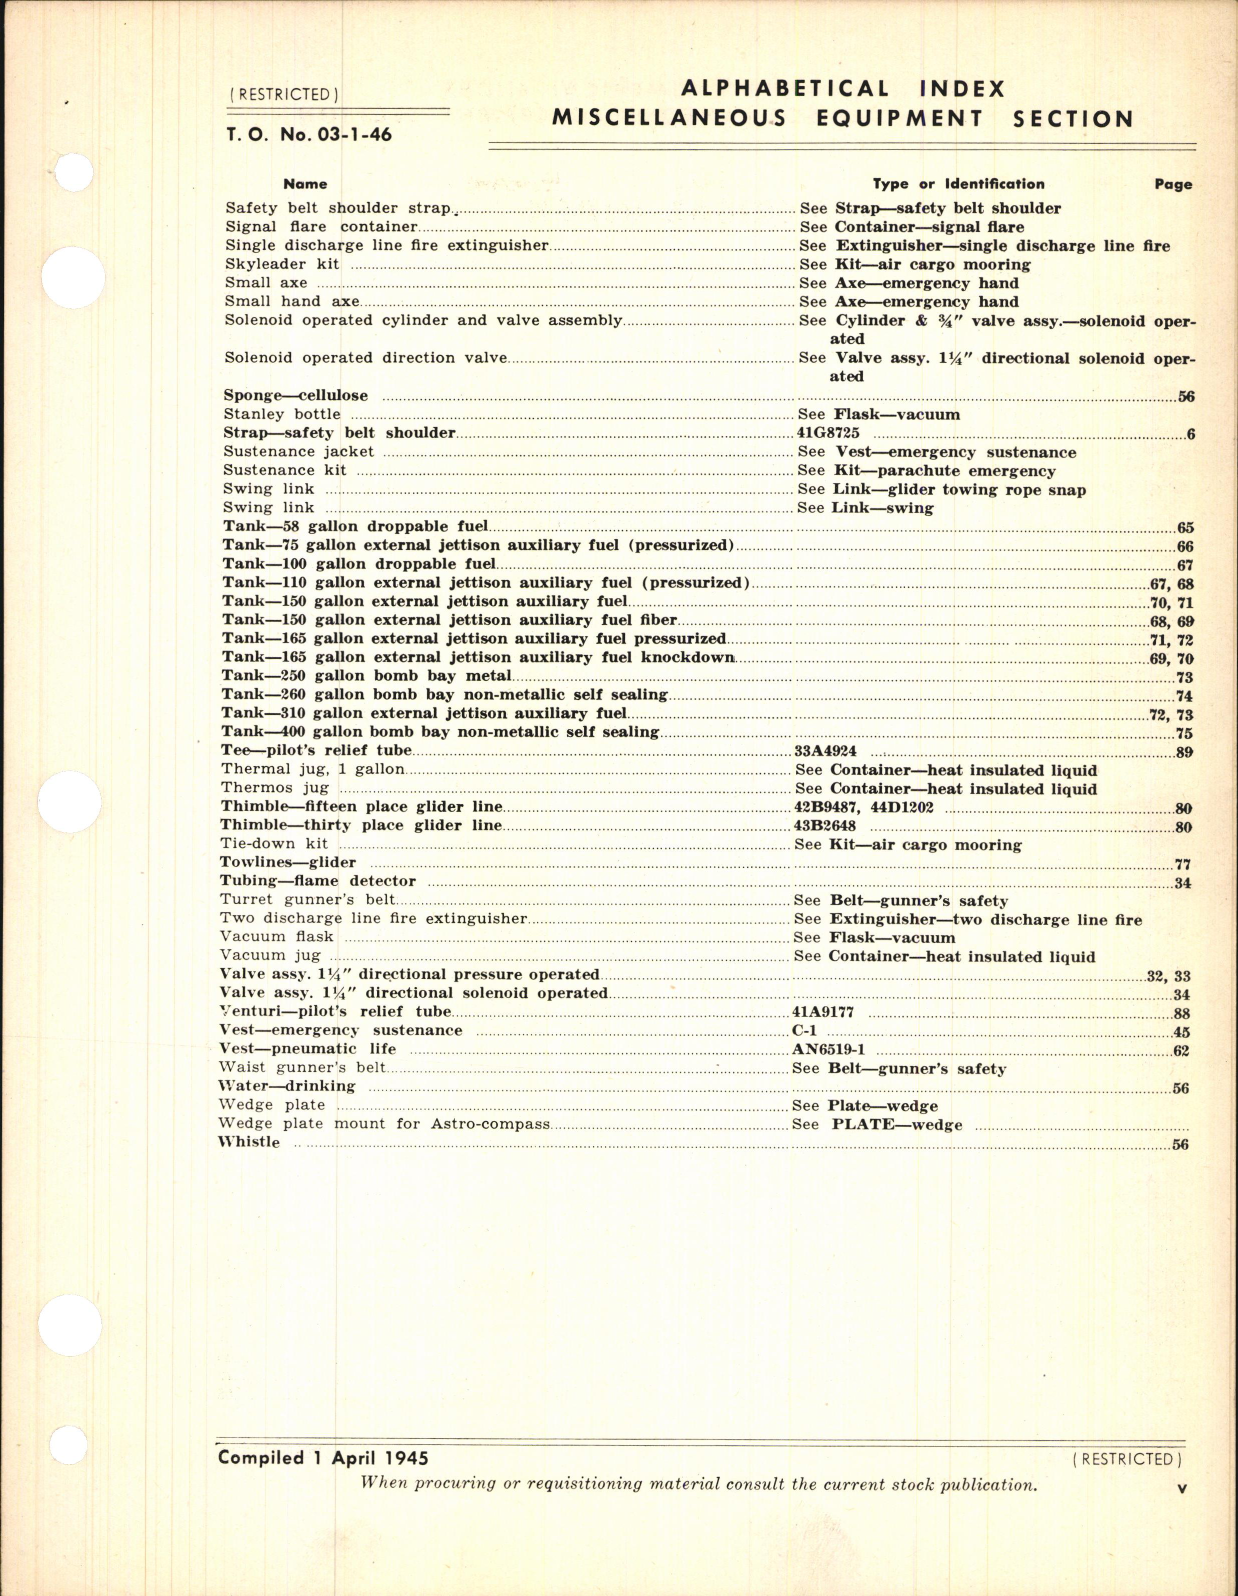 Sample page 7 from AirCorps Library document: Index of Army-Navy Miscellaneous Aeronautical Equipment 